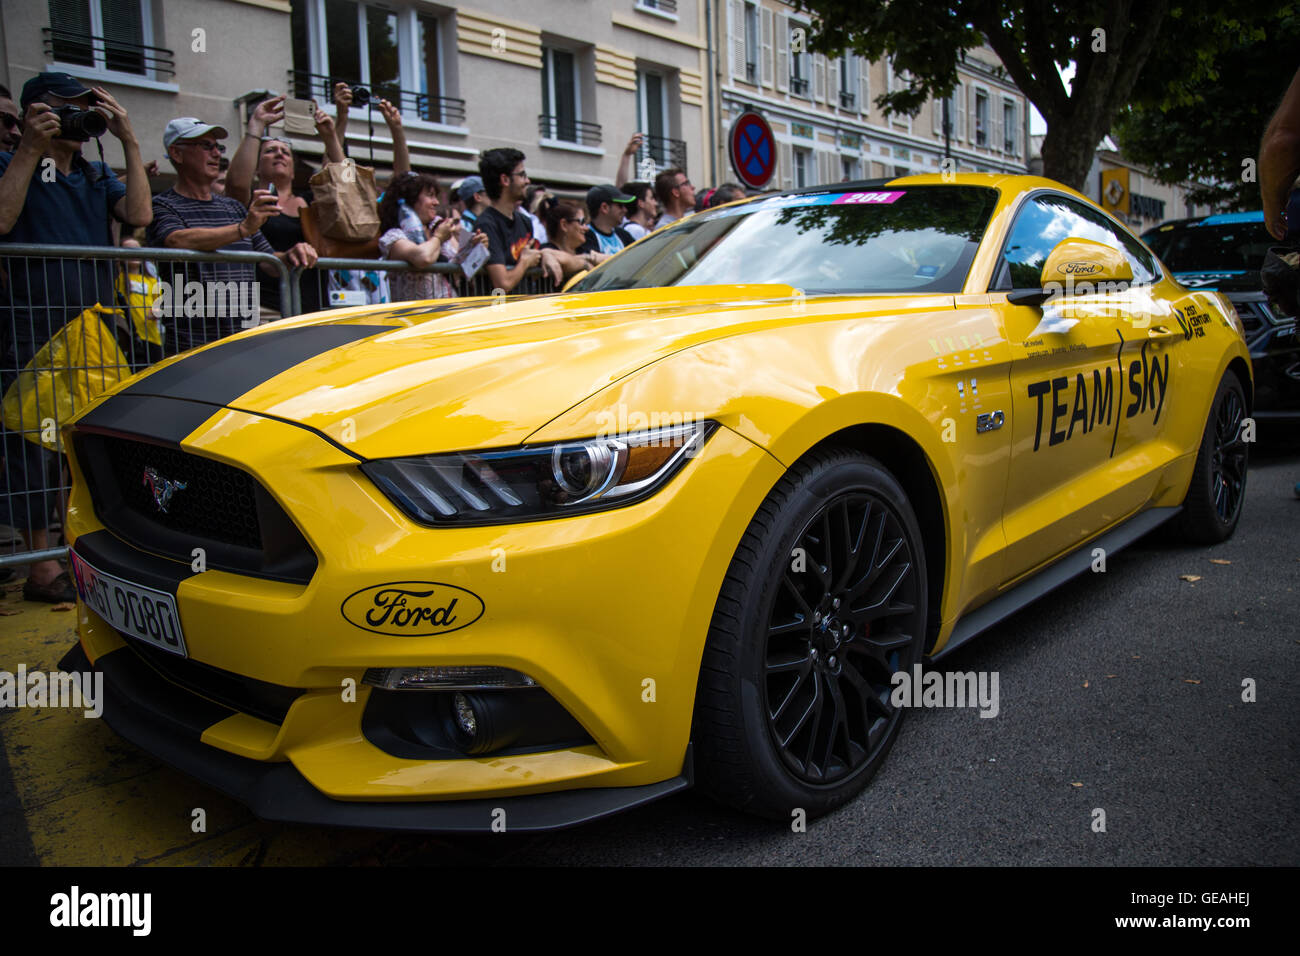 24th July, 2016. Chantilly, FR. Team Sky introduced a yellow painted version of one of their team cars, a Ford Mustang GT, in celebration of Chris Froome's overall victory. John Kavouris/Alamy Live News Stock Photo